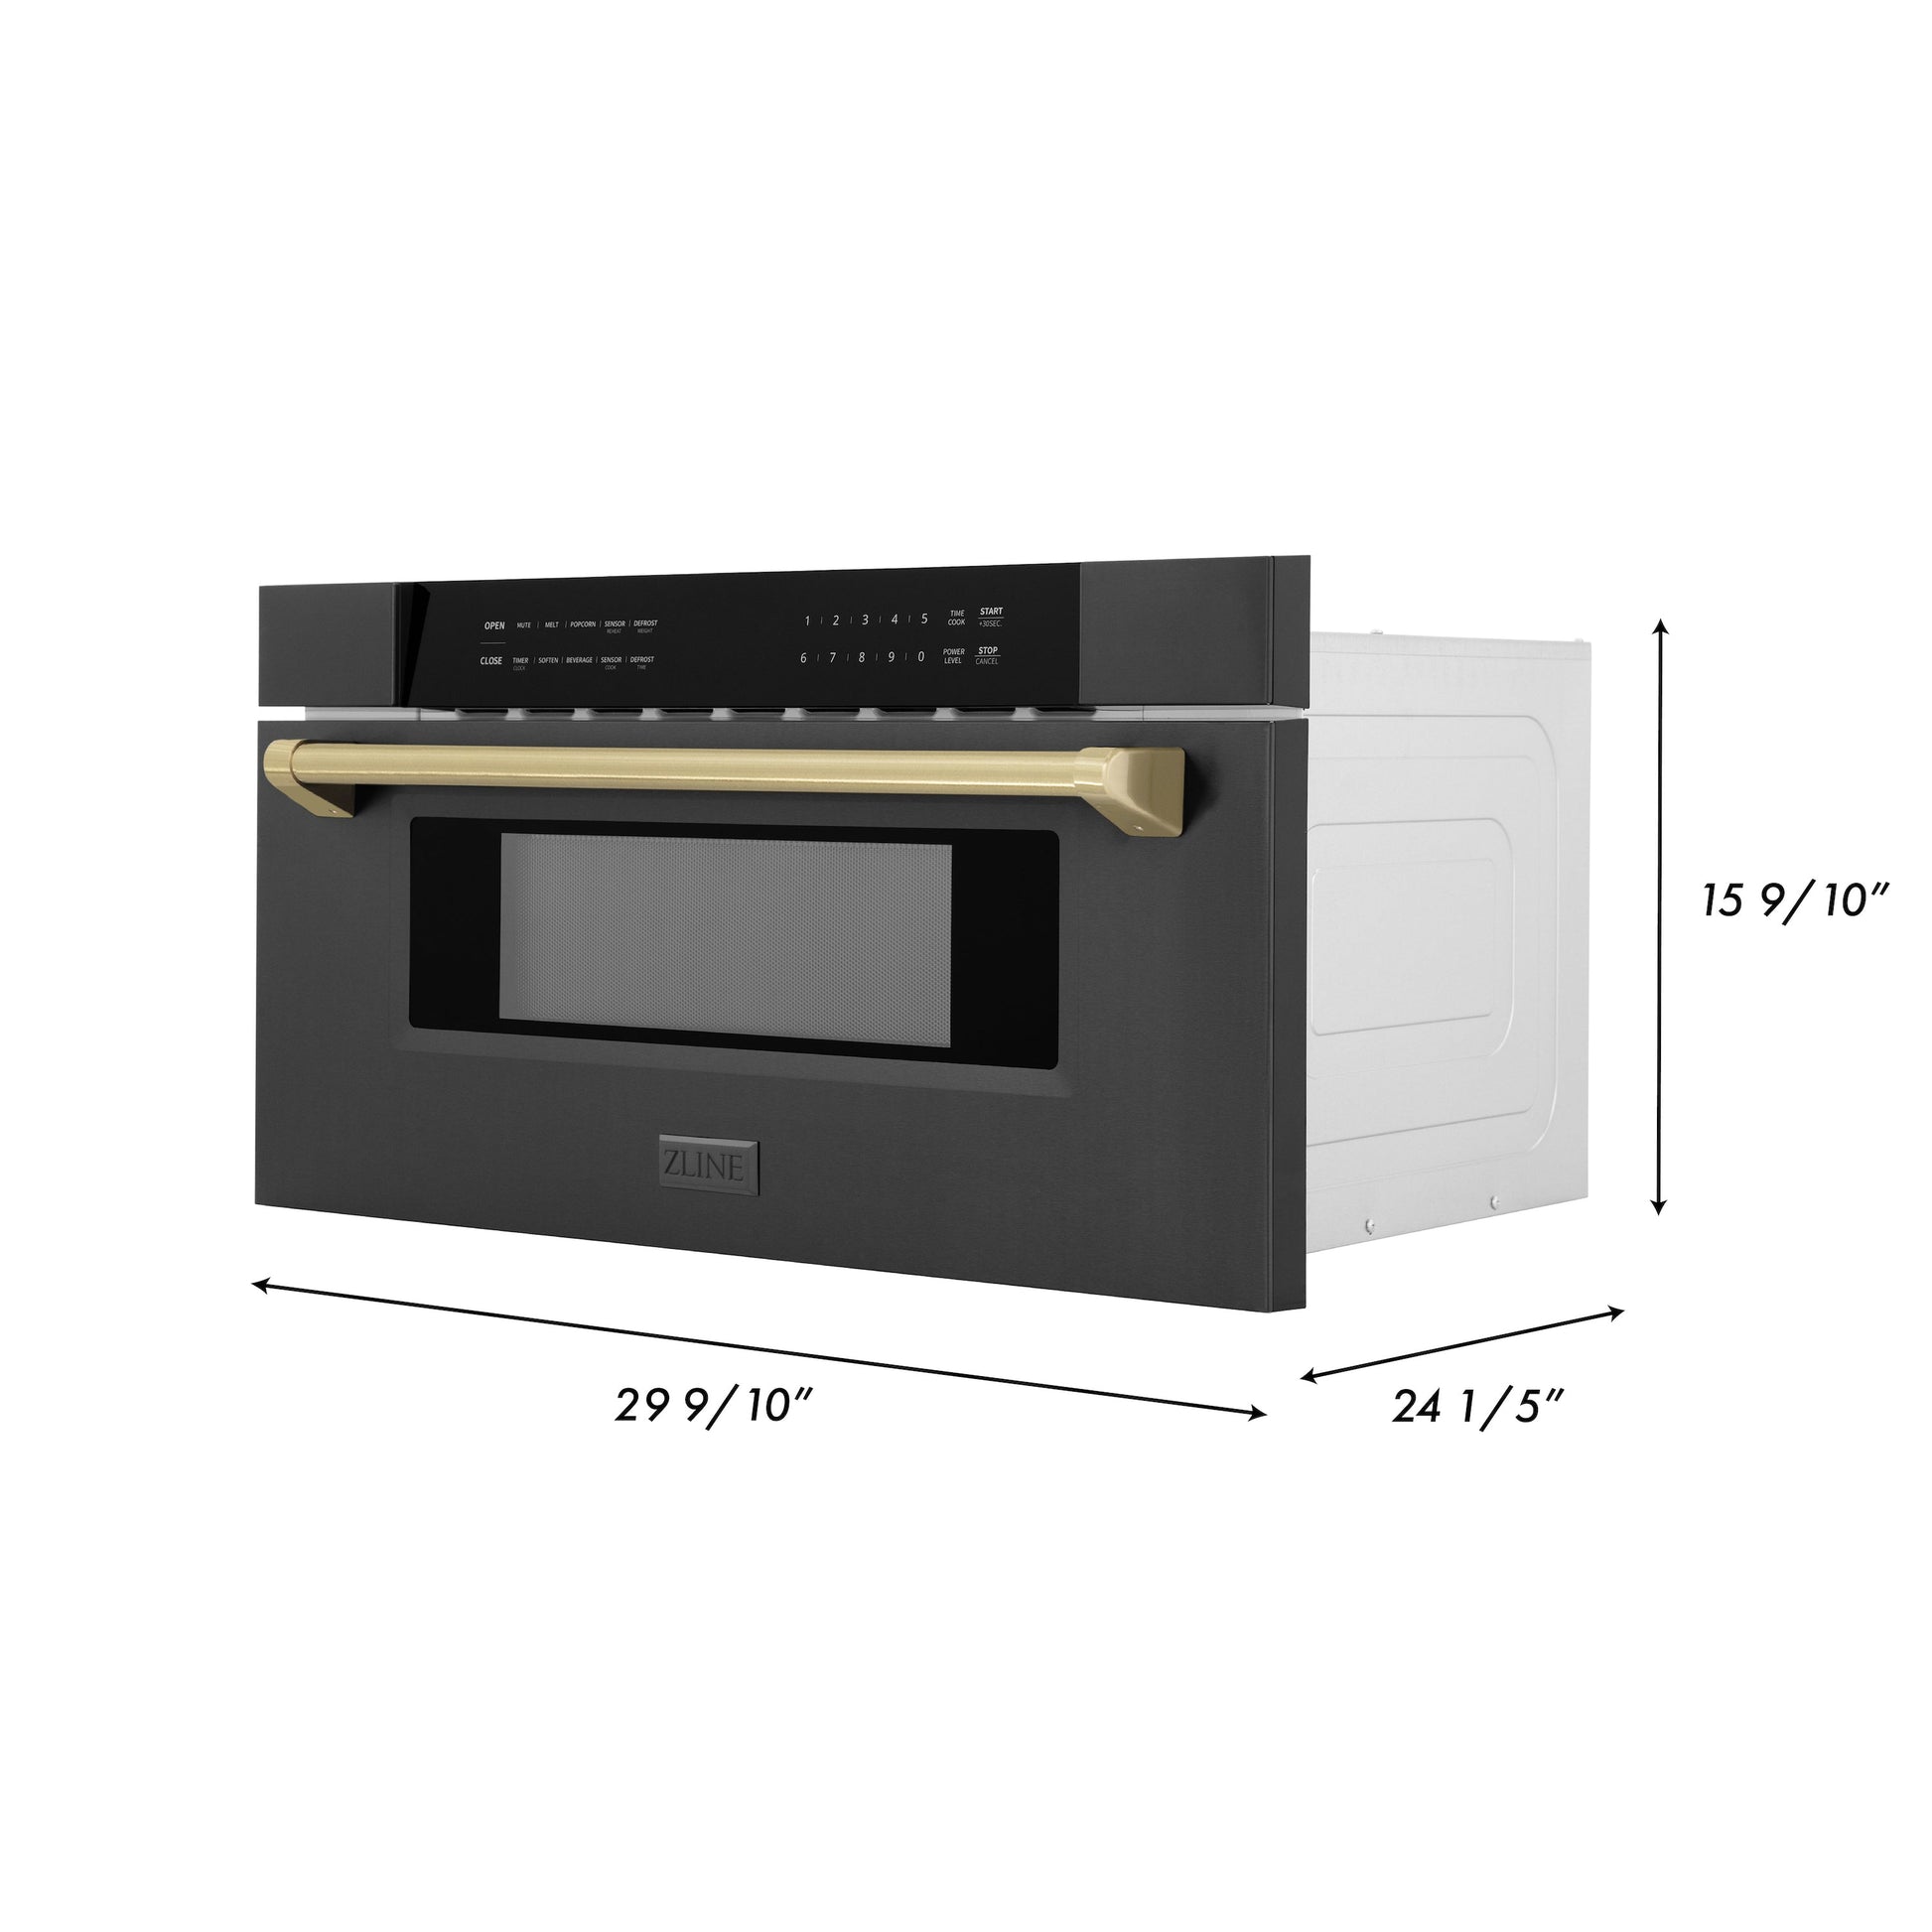 ZLINE Autograph Edition 30" Built-in Microwave Drawer - Black Stainless Steel with Accents